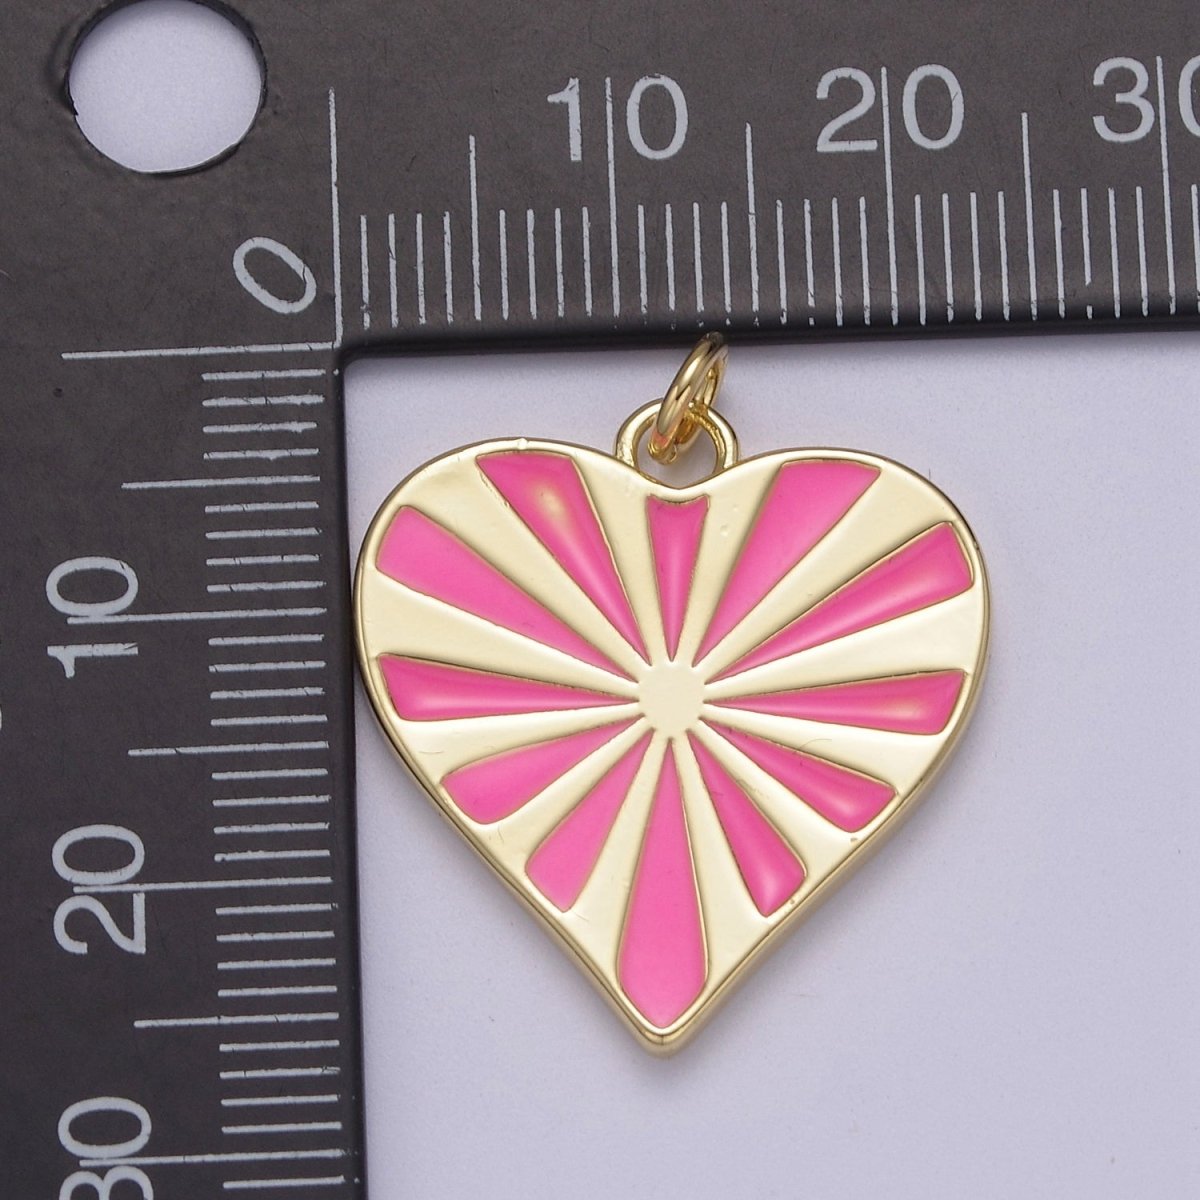 14K Gold Fill Enamel Heart Shaped Pendant, Heart Radiant Pink Charm Necklace DIY Jewelry Accessories W-180 - DLUXCA